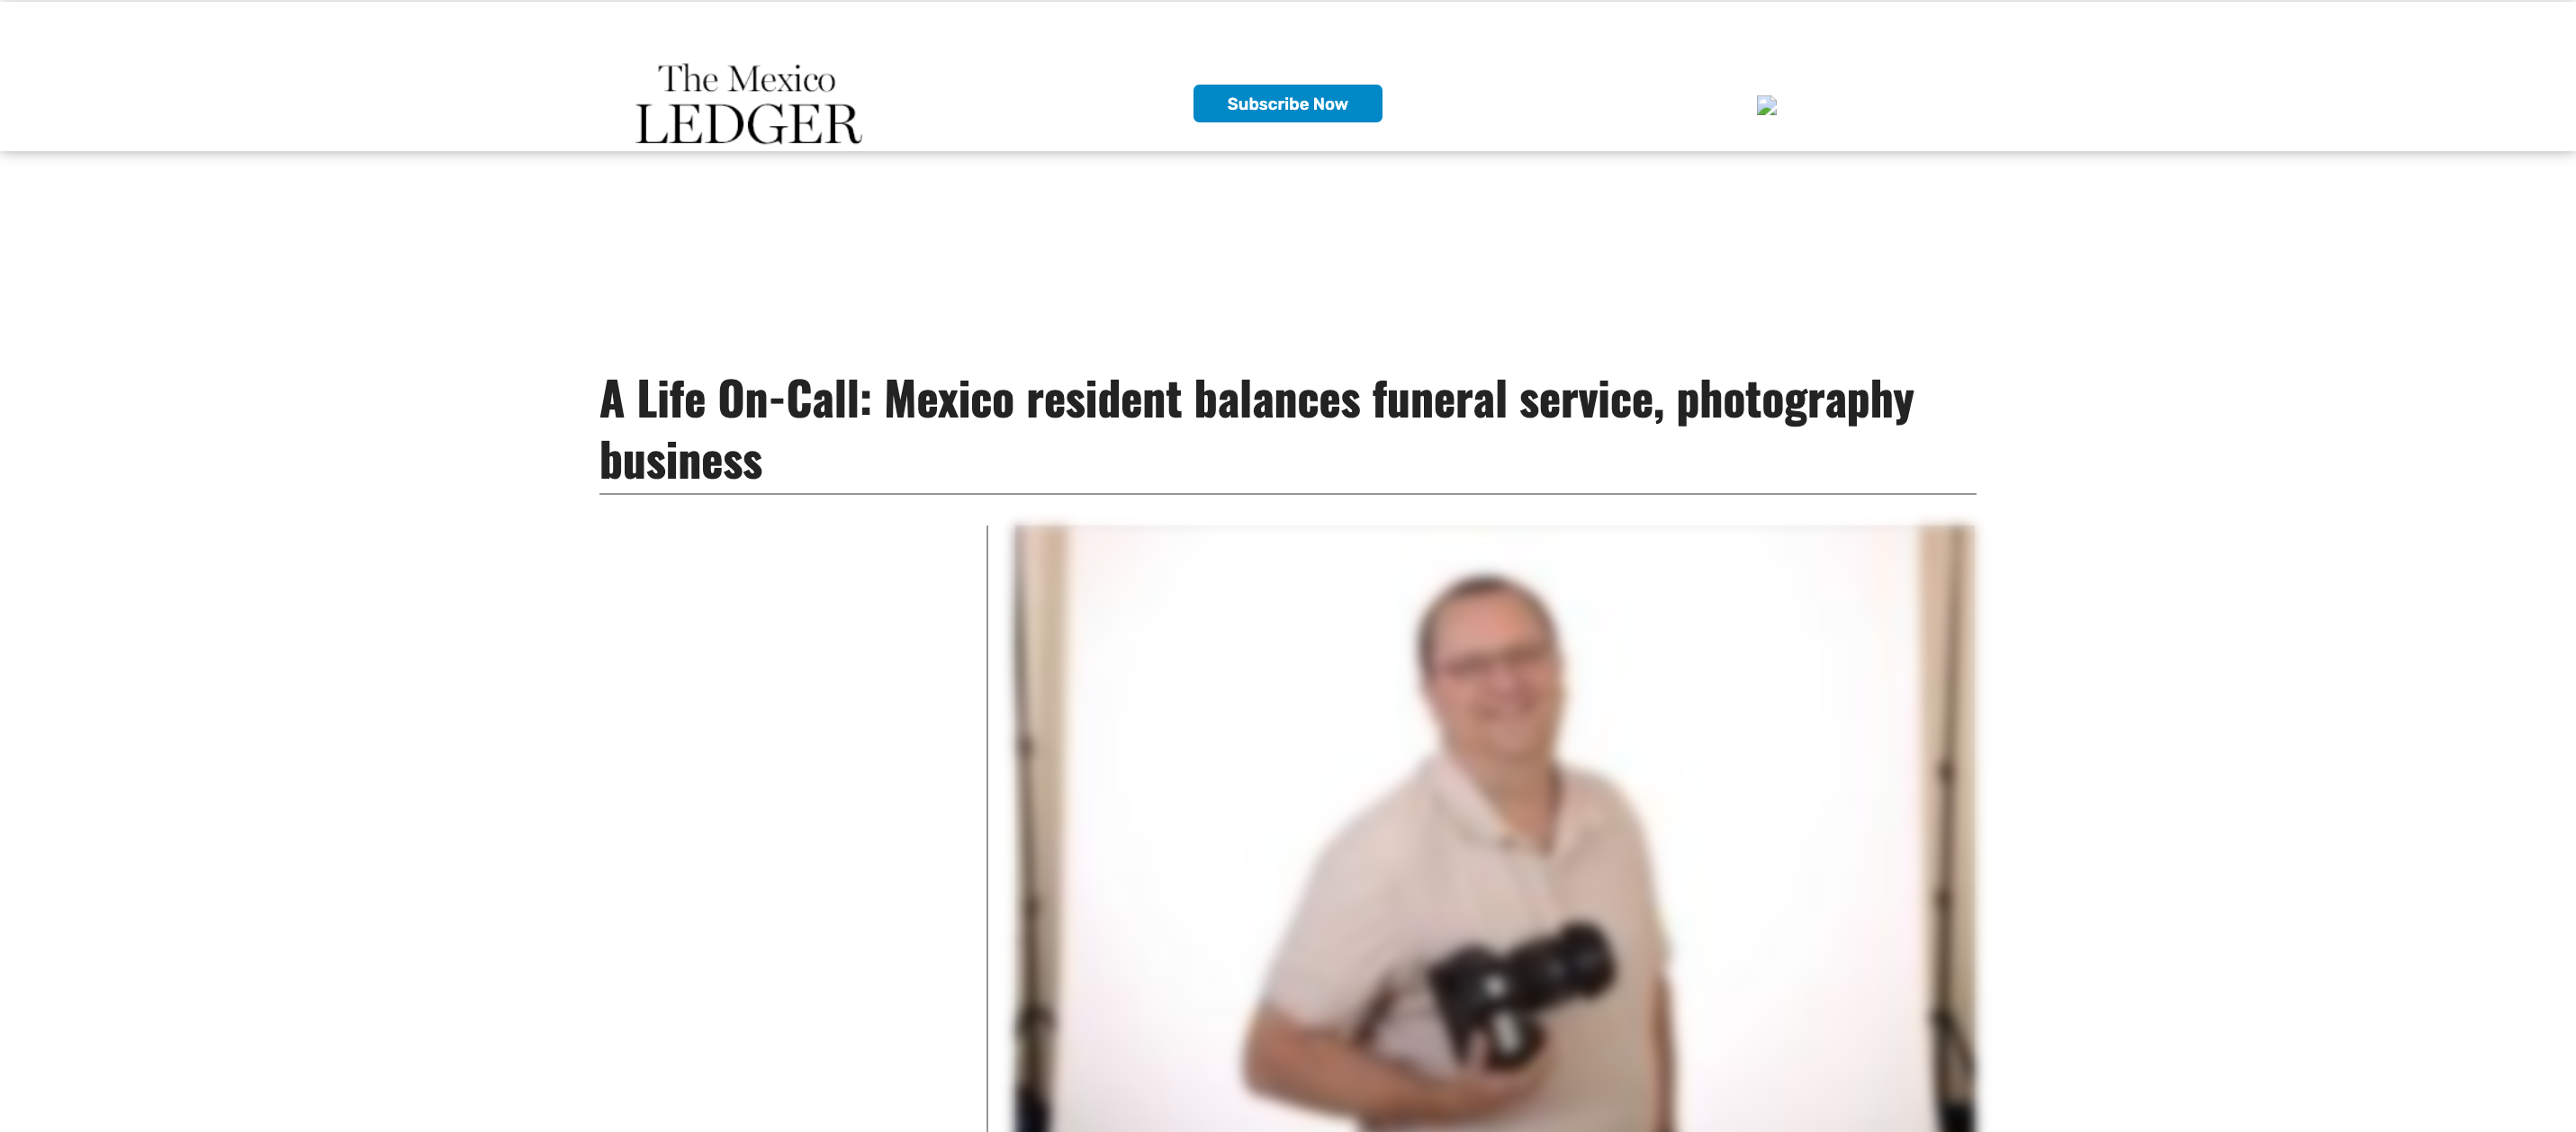 A Life On-Call: Mexico resident balances funeral service, photography business